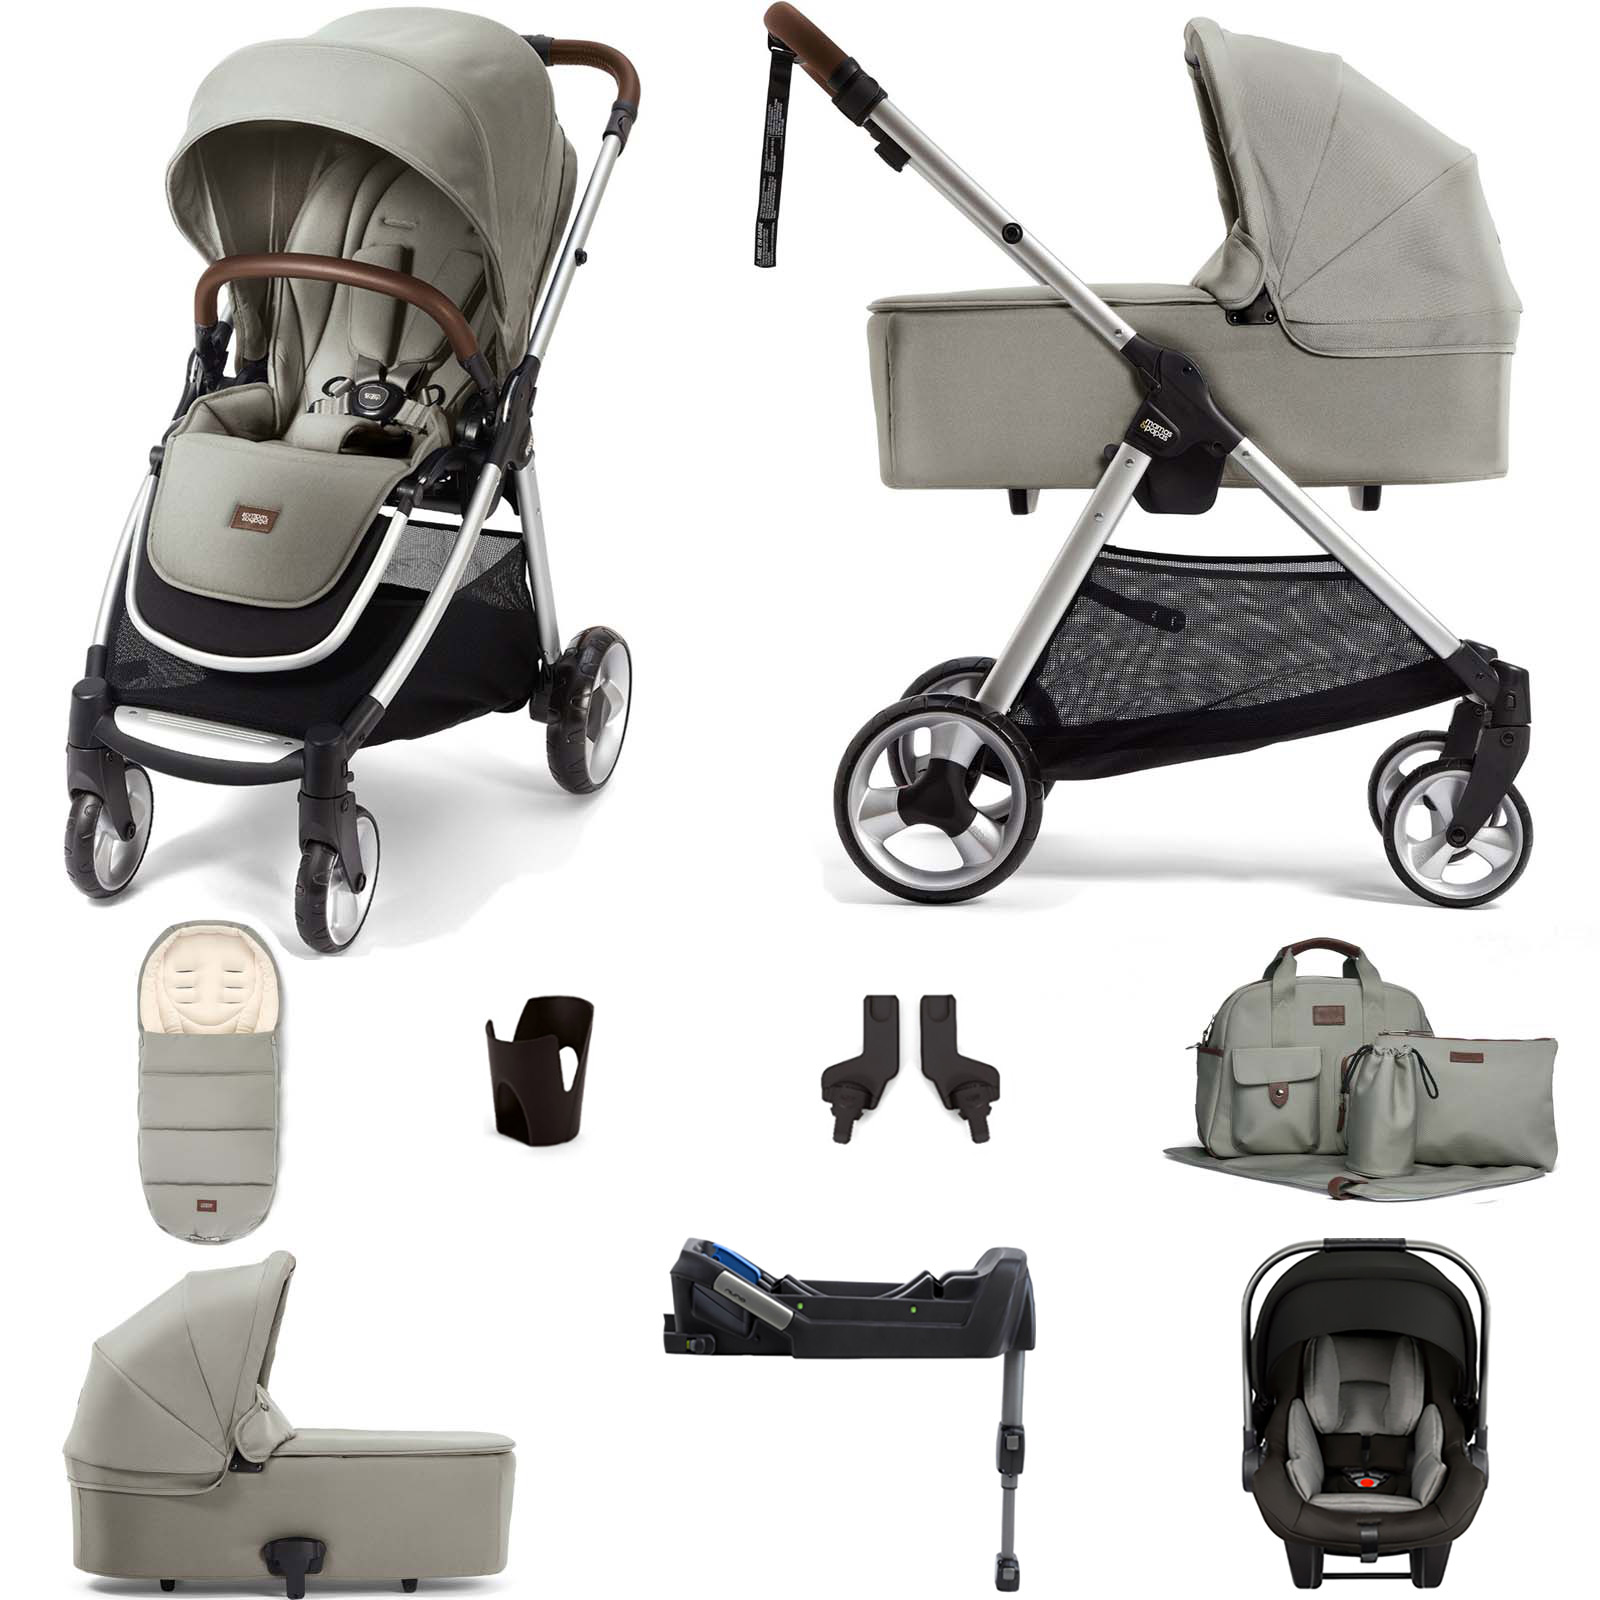 Mamas & Papas Flip XT2 Essentials (Pipa Lite Car Seat & ISOFIX Base) Travel System with Carrycot - Sage Green